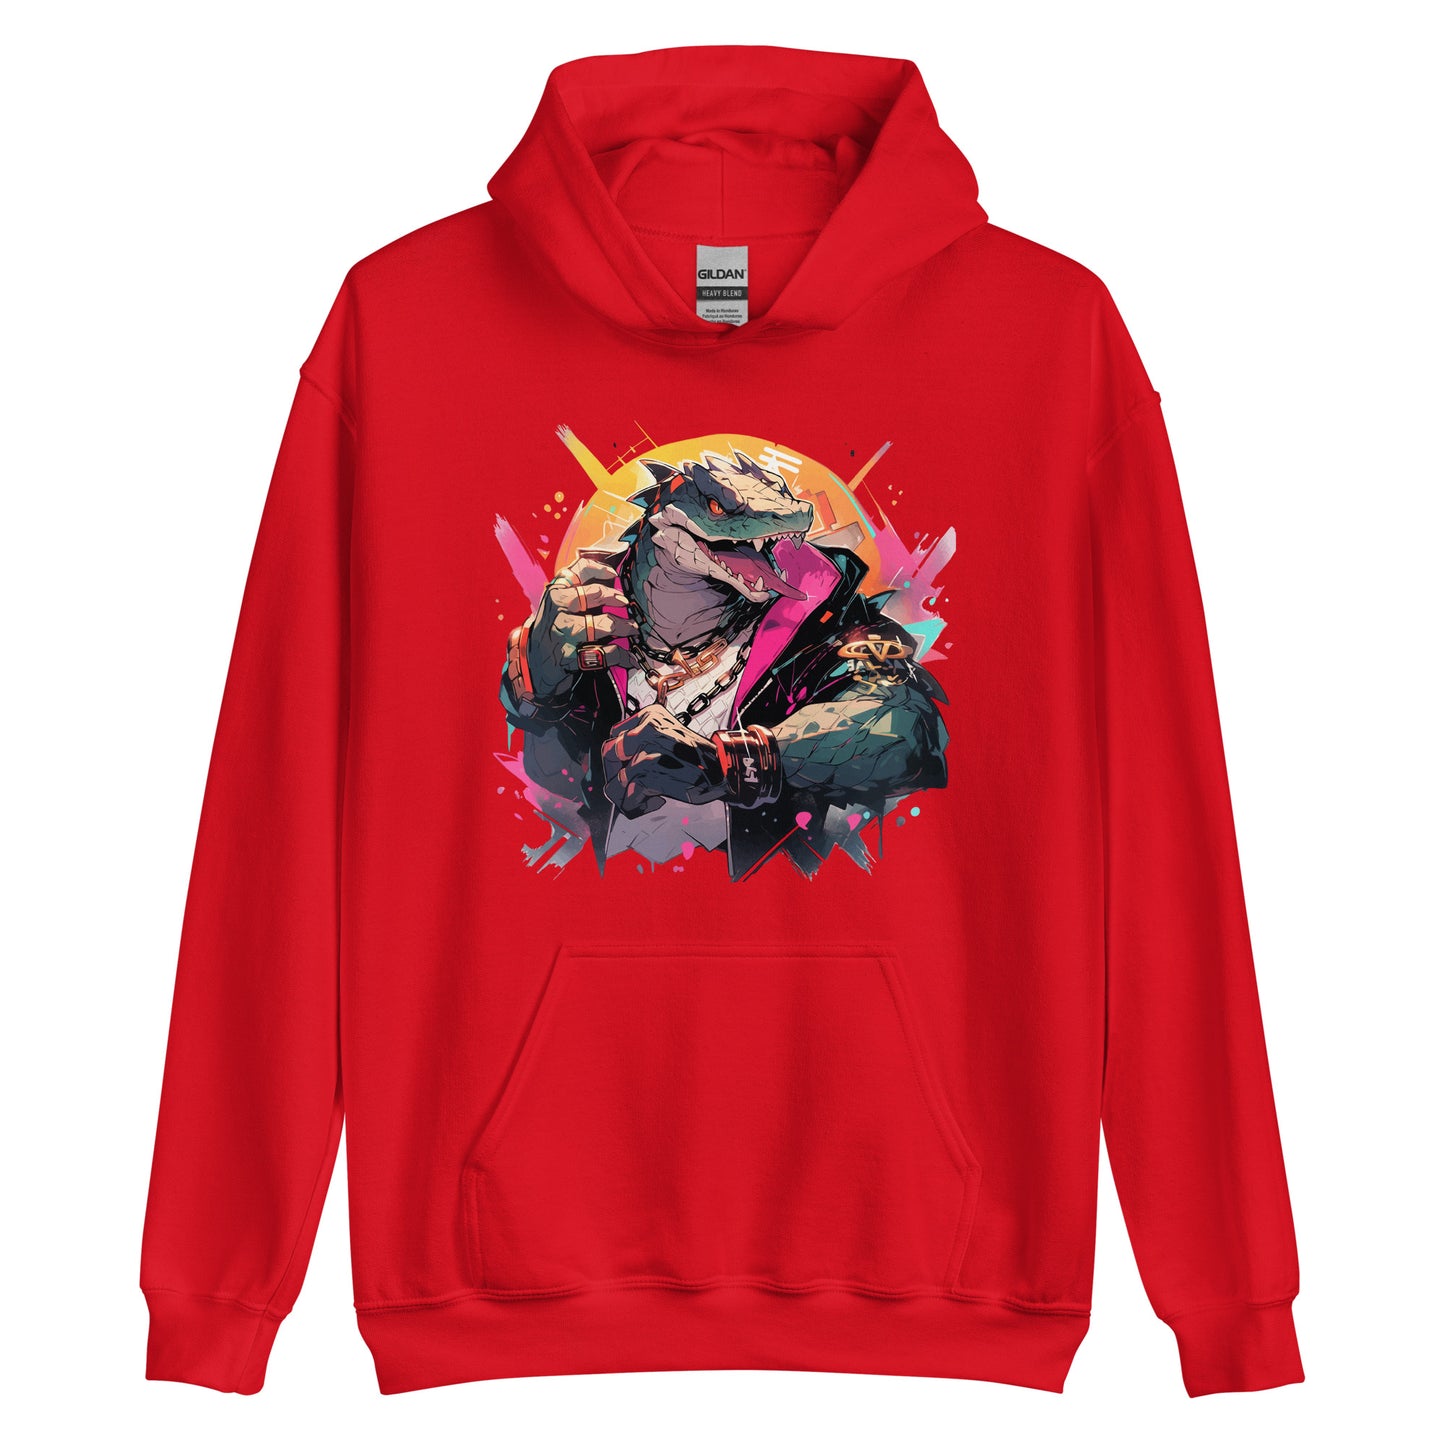 Dangerous and influential reptile, Stylish and rich dino boss bandit, Sharp dragon teeth, Gangster dinosaur and fist fight - Unisex Hoodie